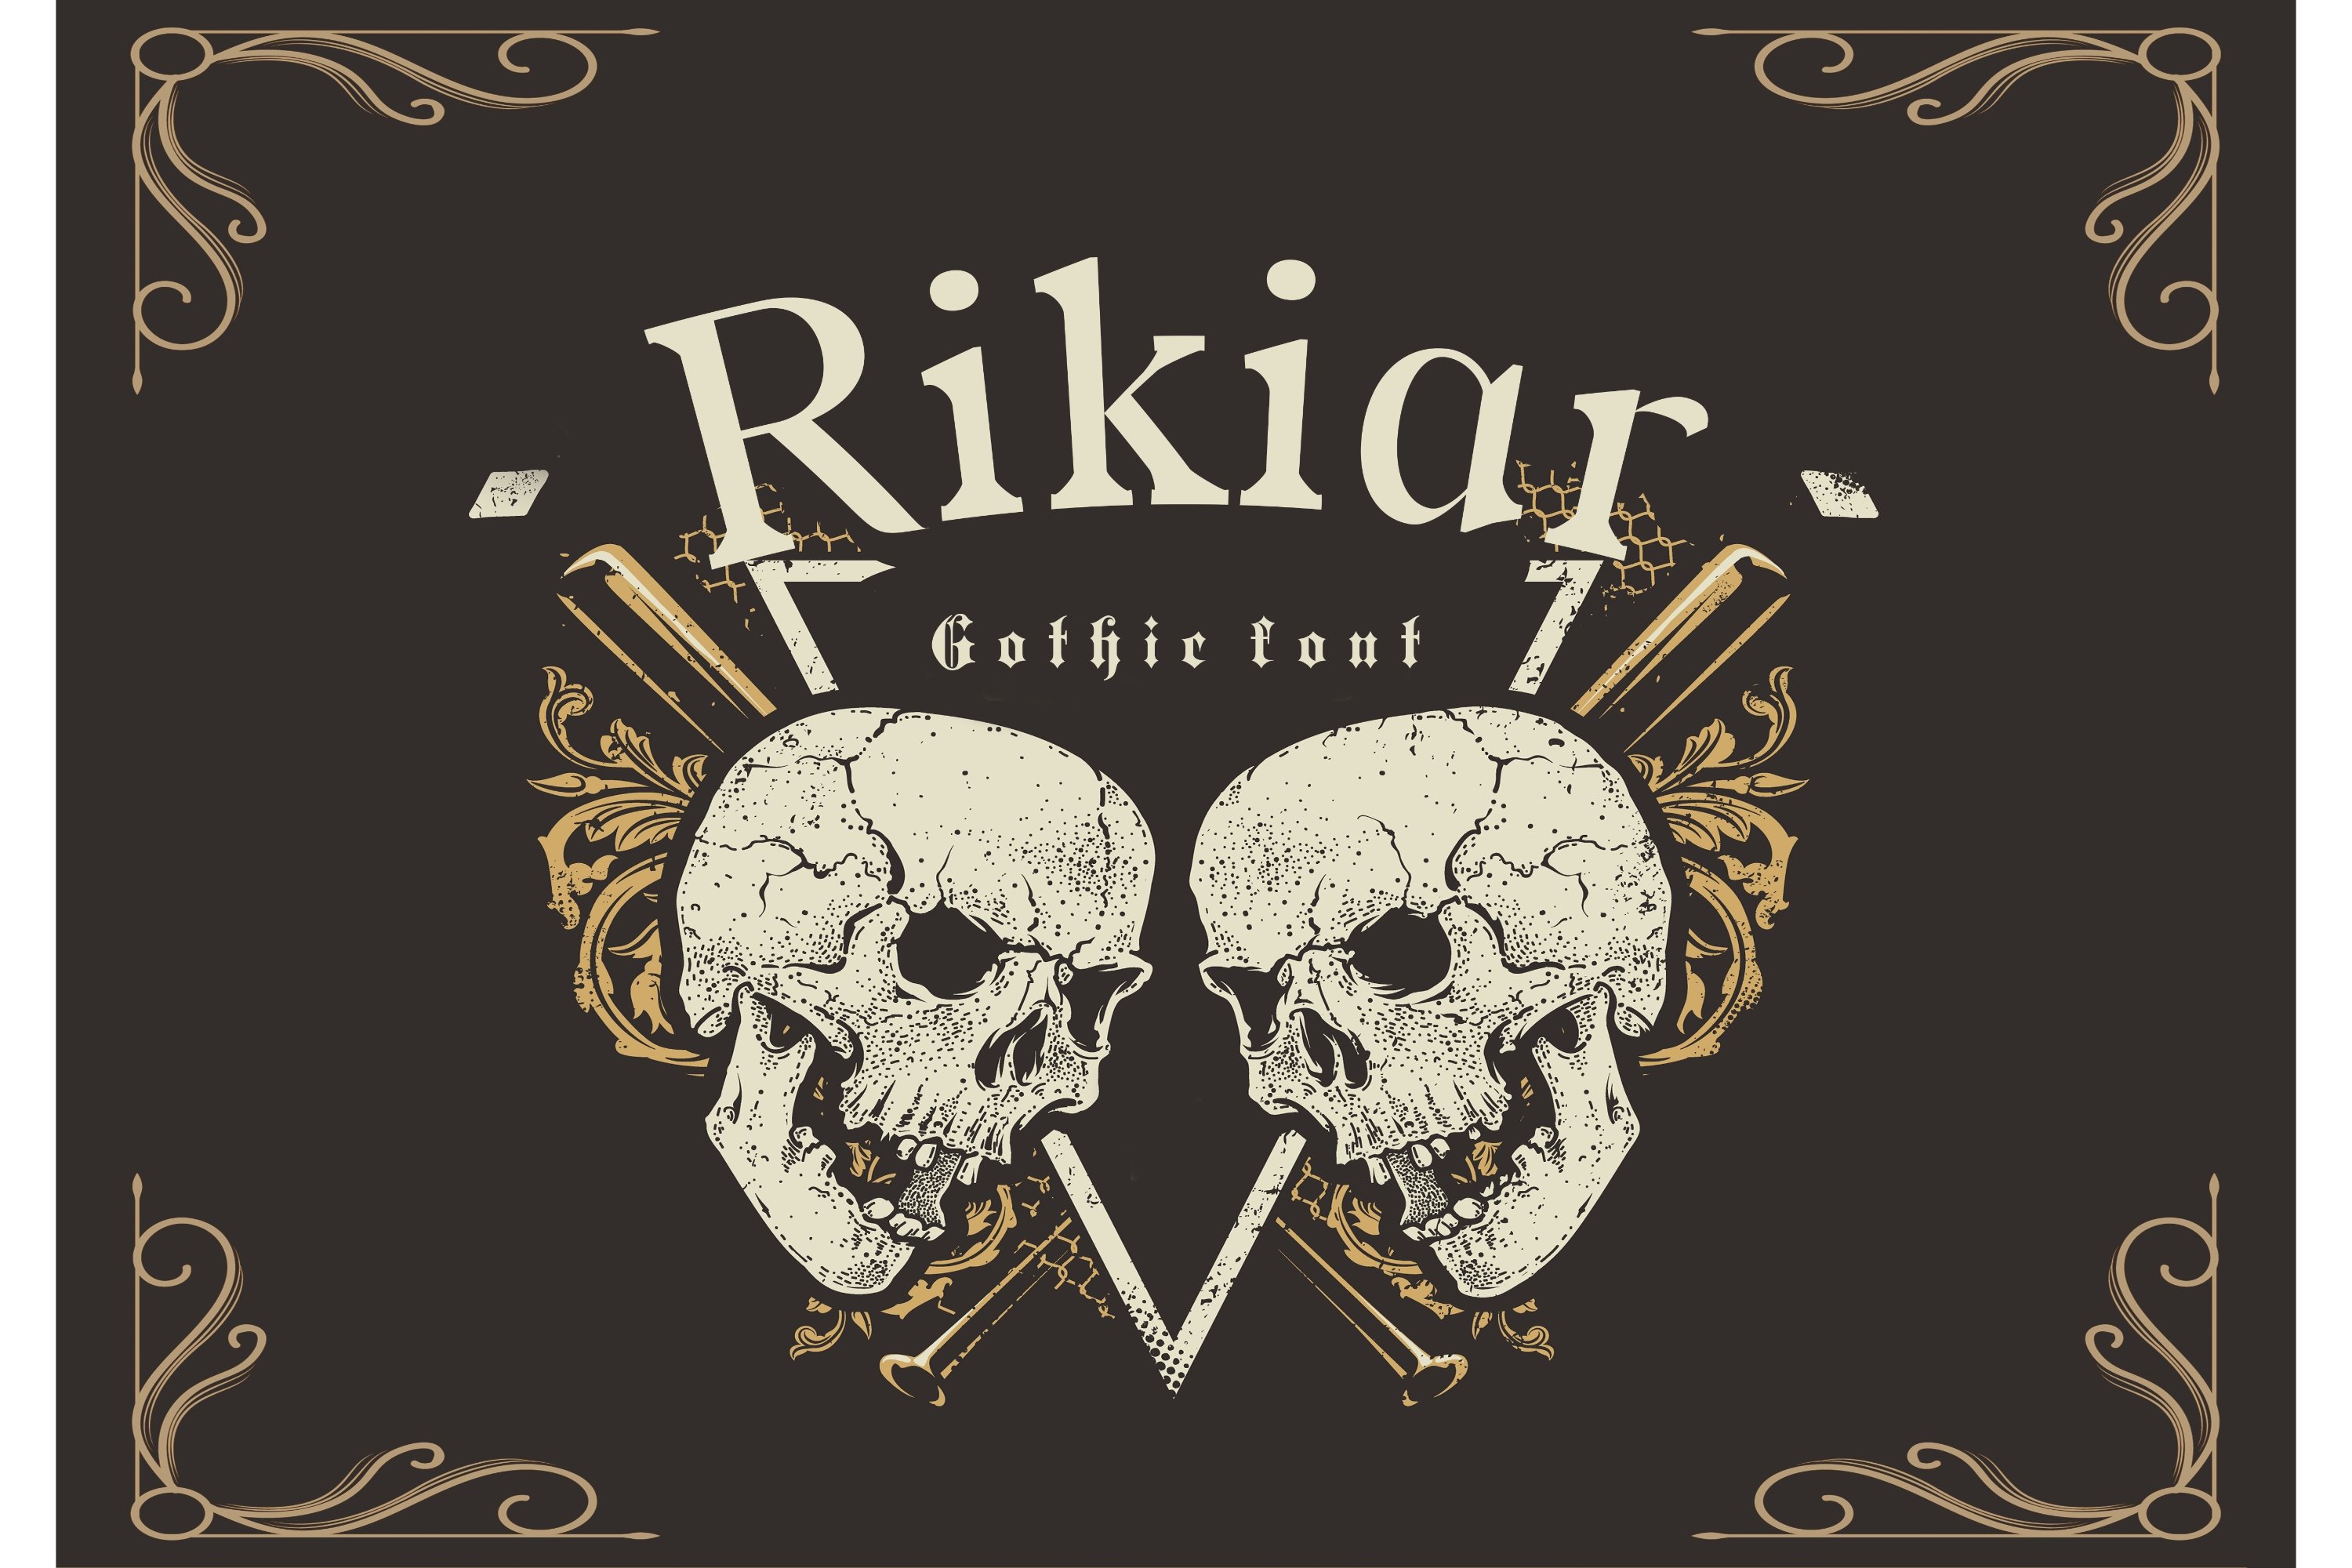 Rikiar Gothic Font cover image.